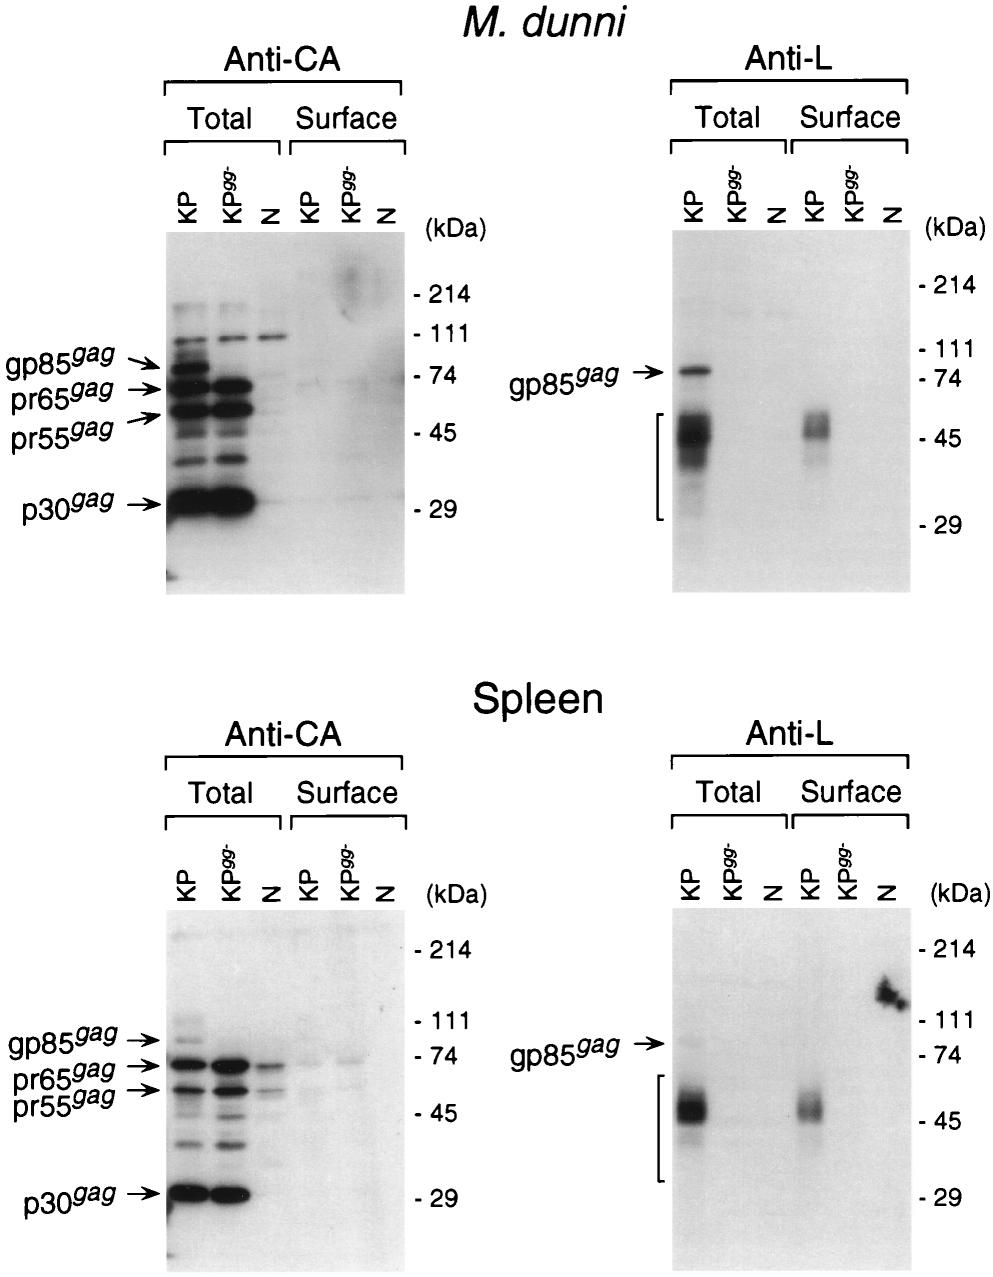 VOL. 71, 1997 PROCESSING OF GLYCOSYLATED Gag 5357 FIG. 1. Immunoblot analysis of Gag proteins produced by M. dunni and spleen cells infected with KP.